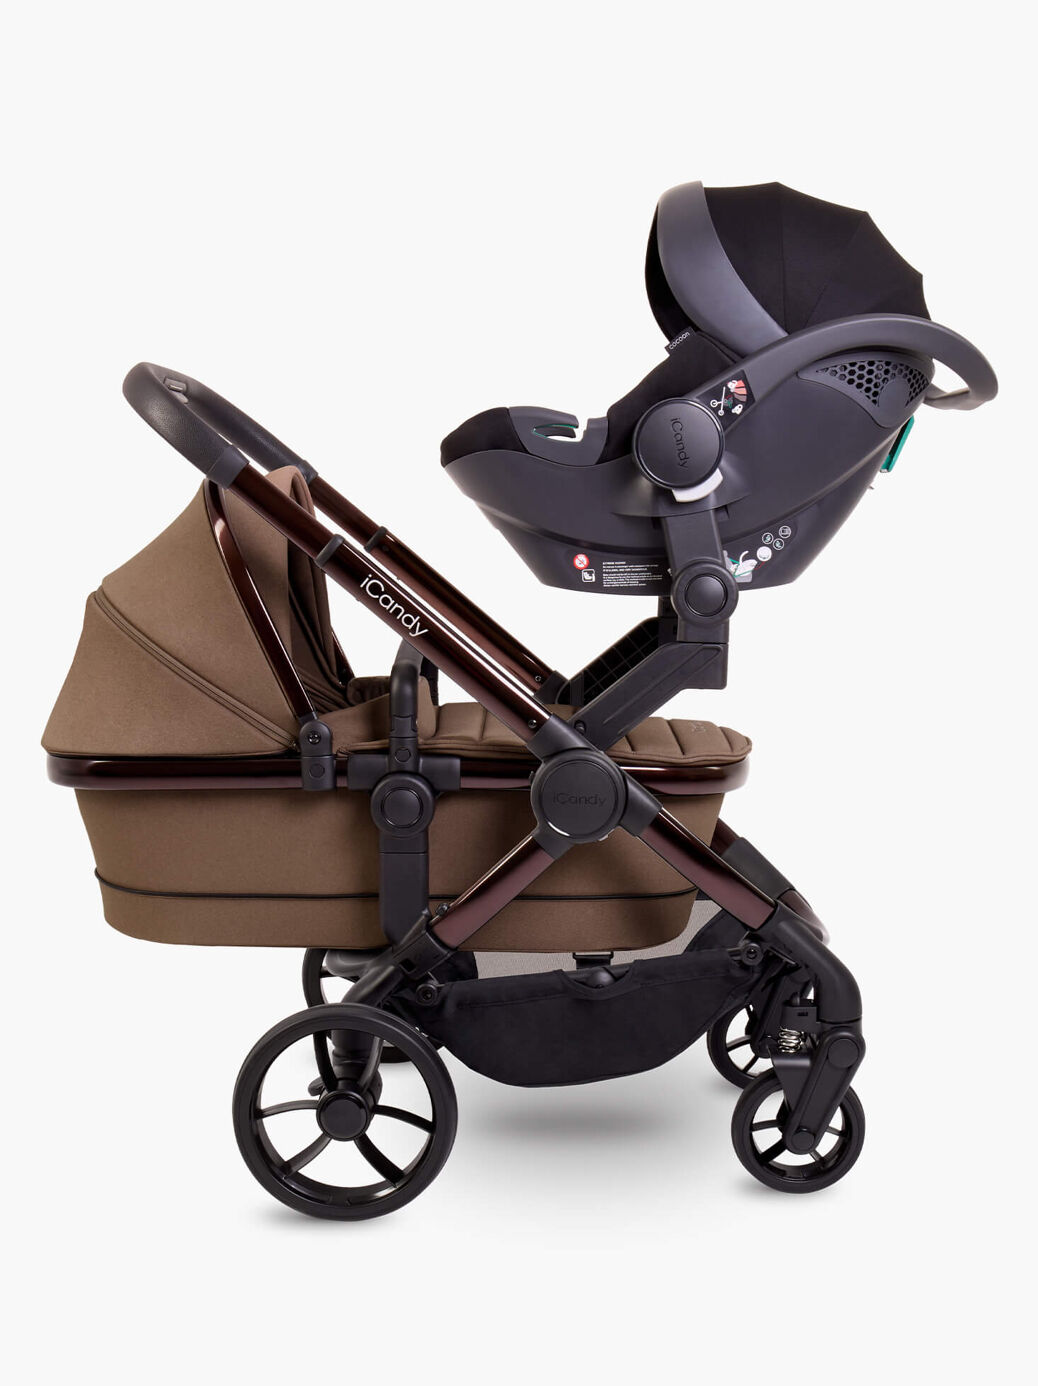 iCandy Peach 7 Pushchair and Carrycot Twin - Coco